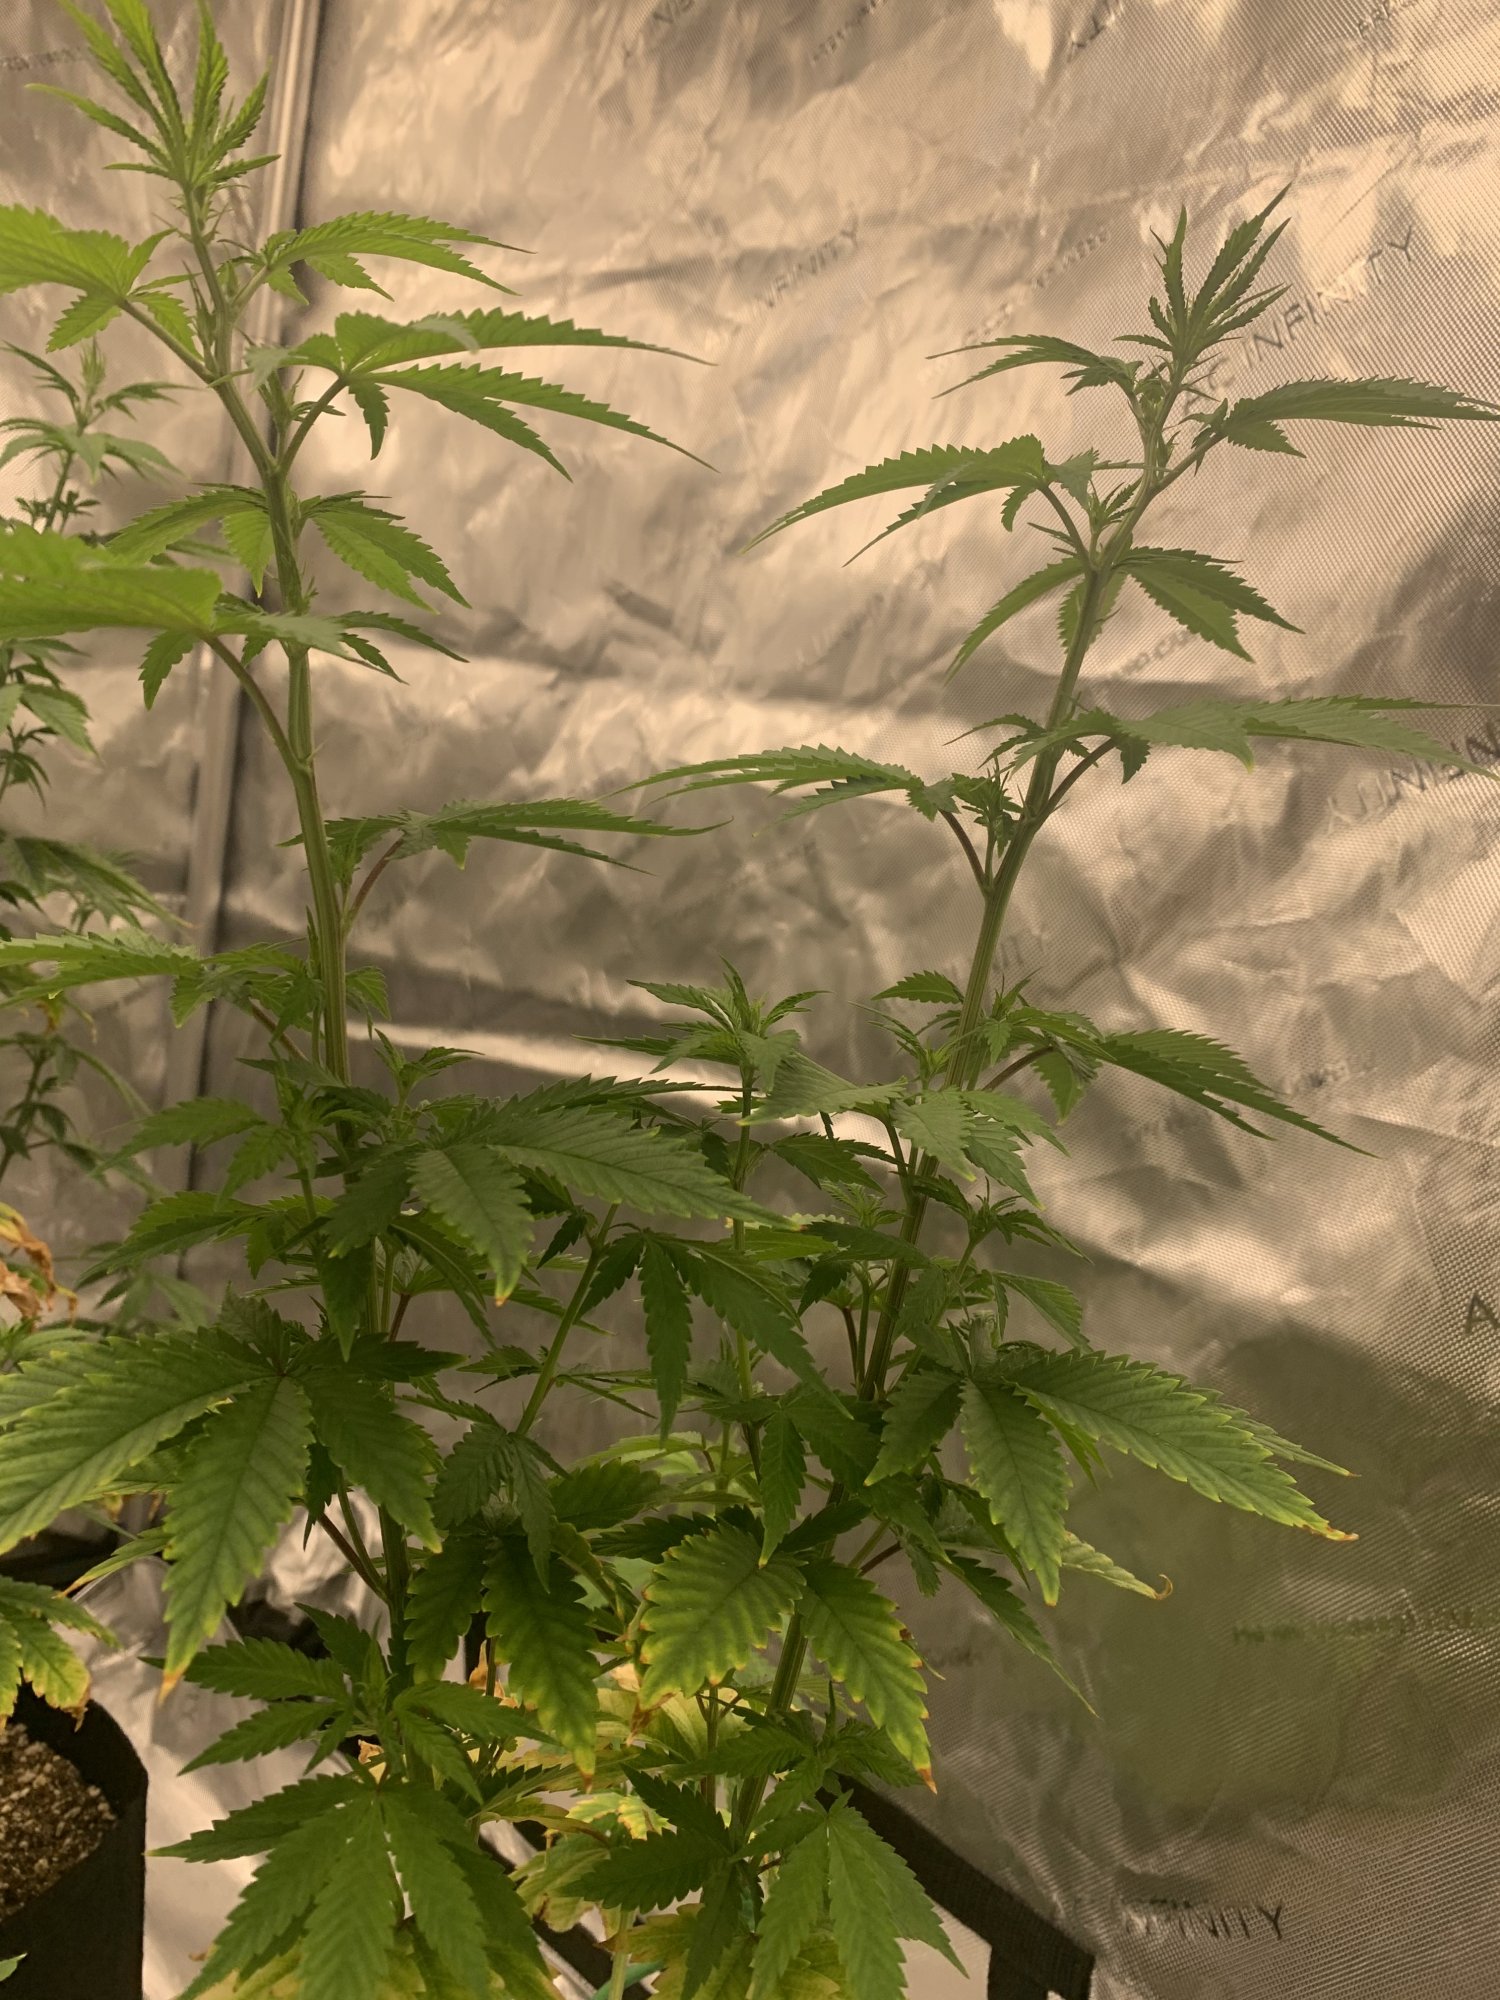 First time grower with a question